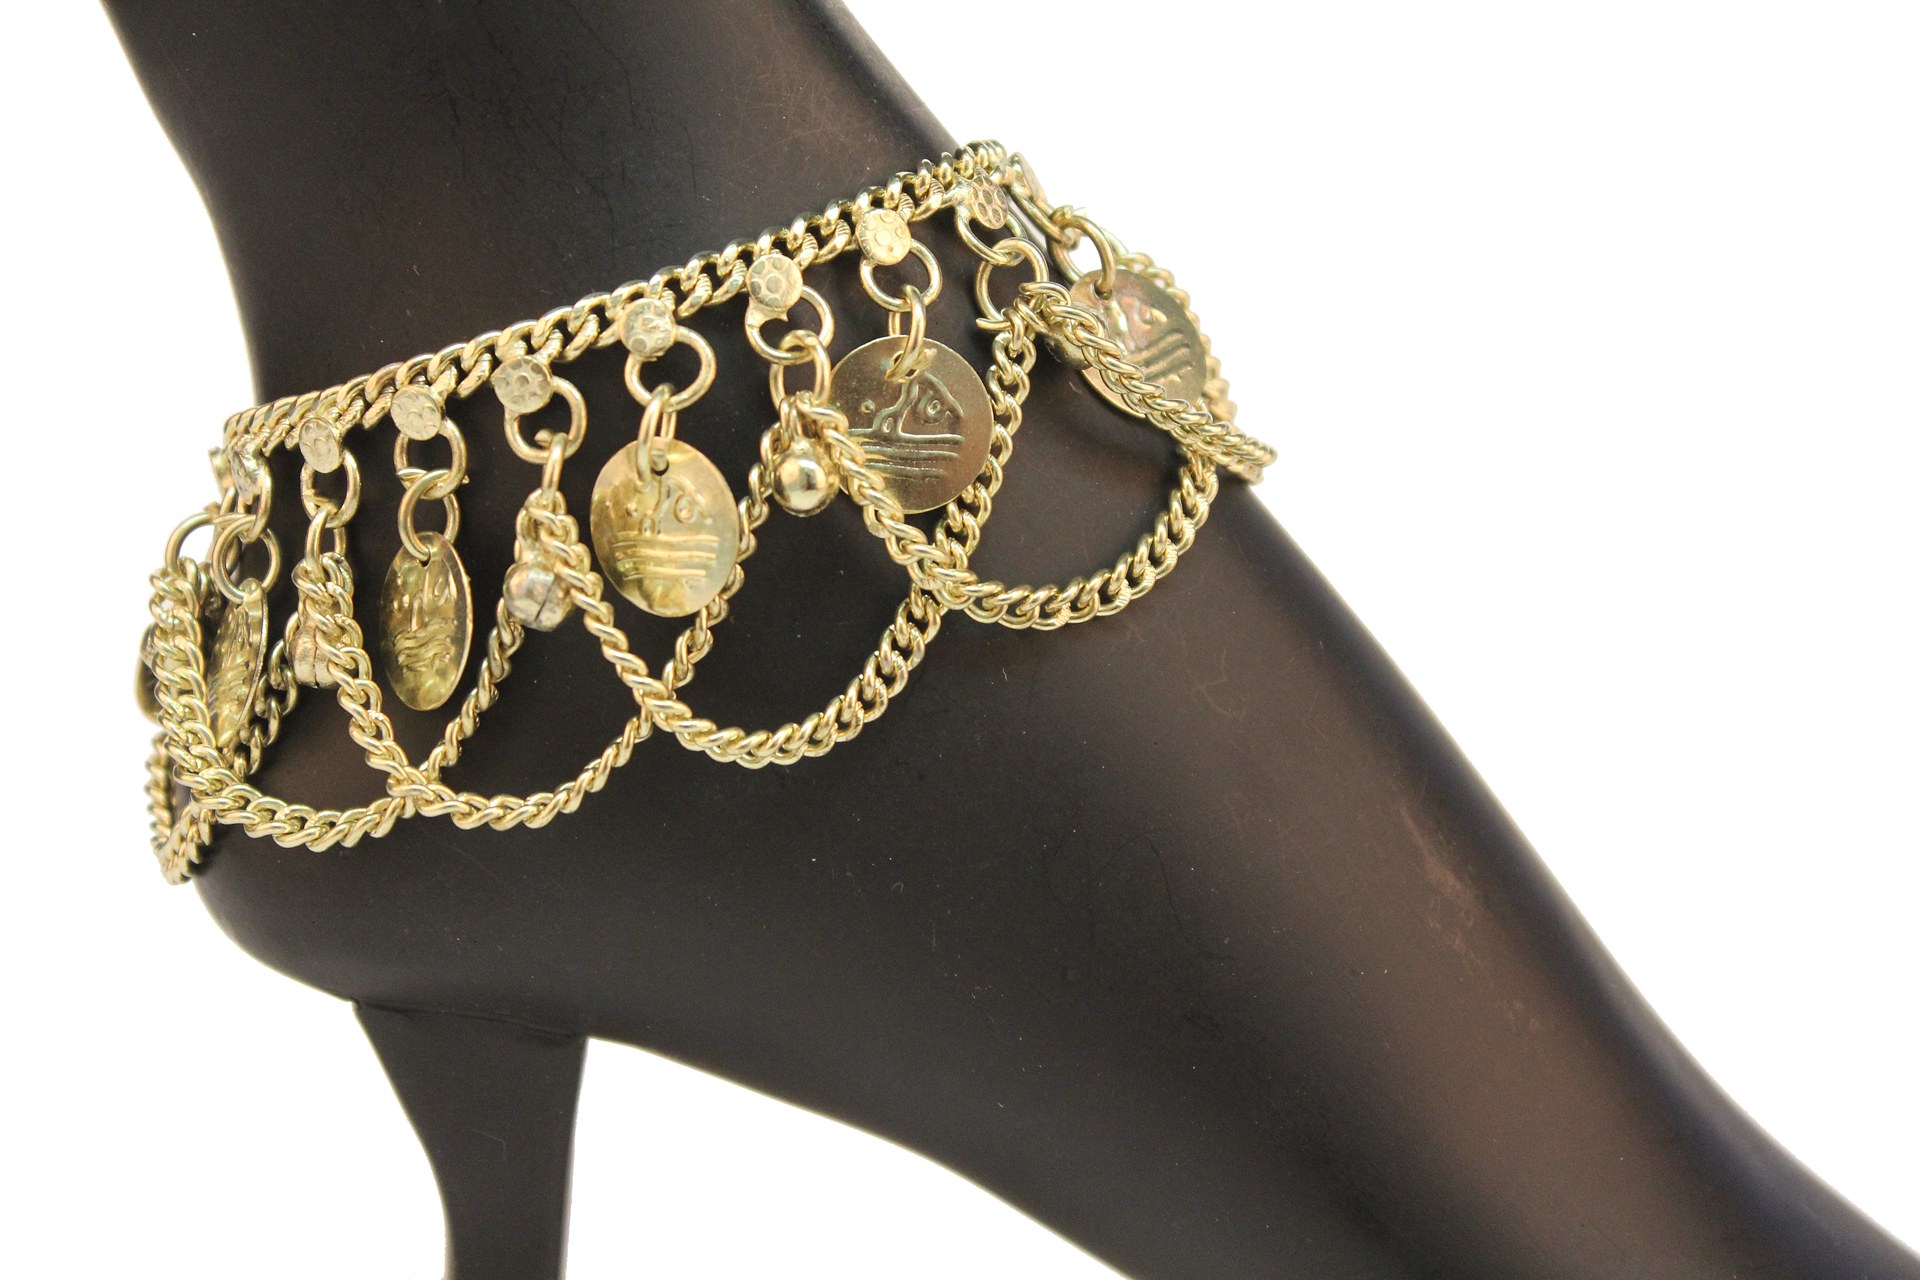 Belly Dancer Costume Anklets with Coins and Swags